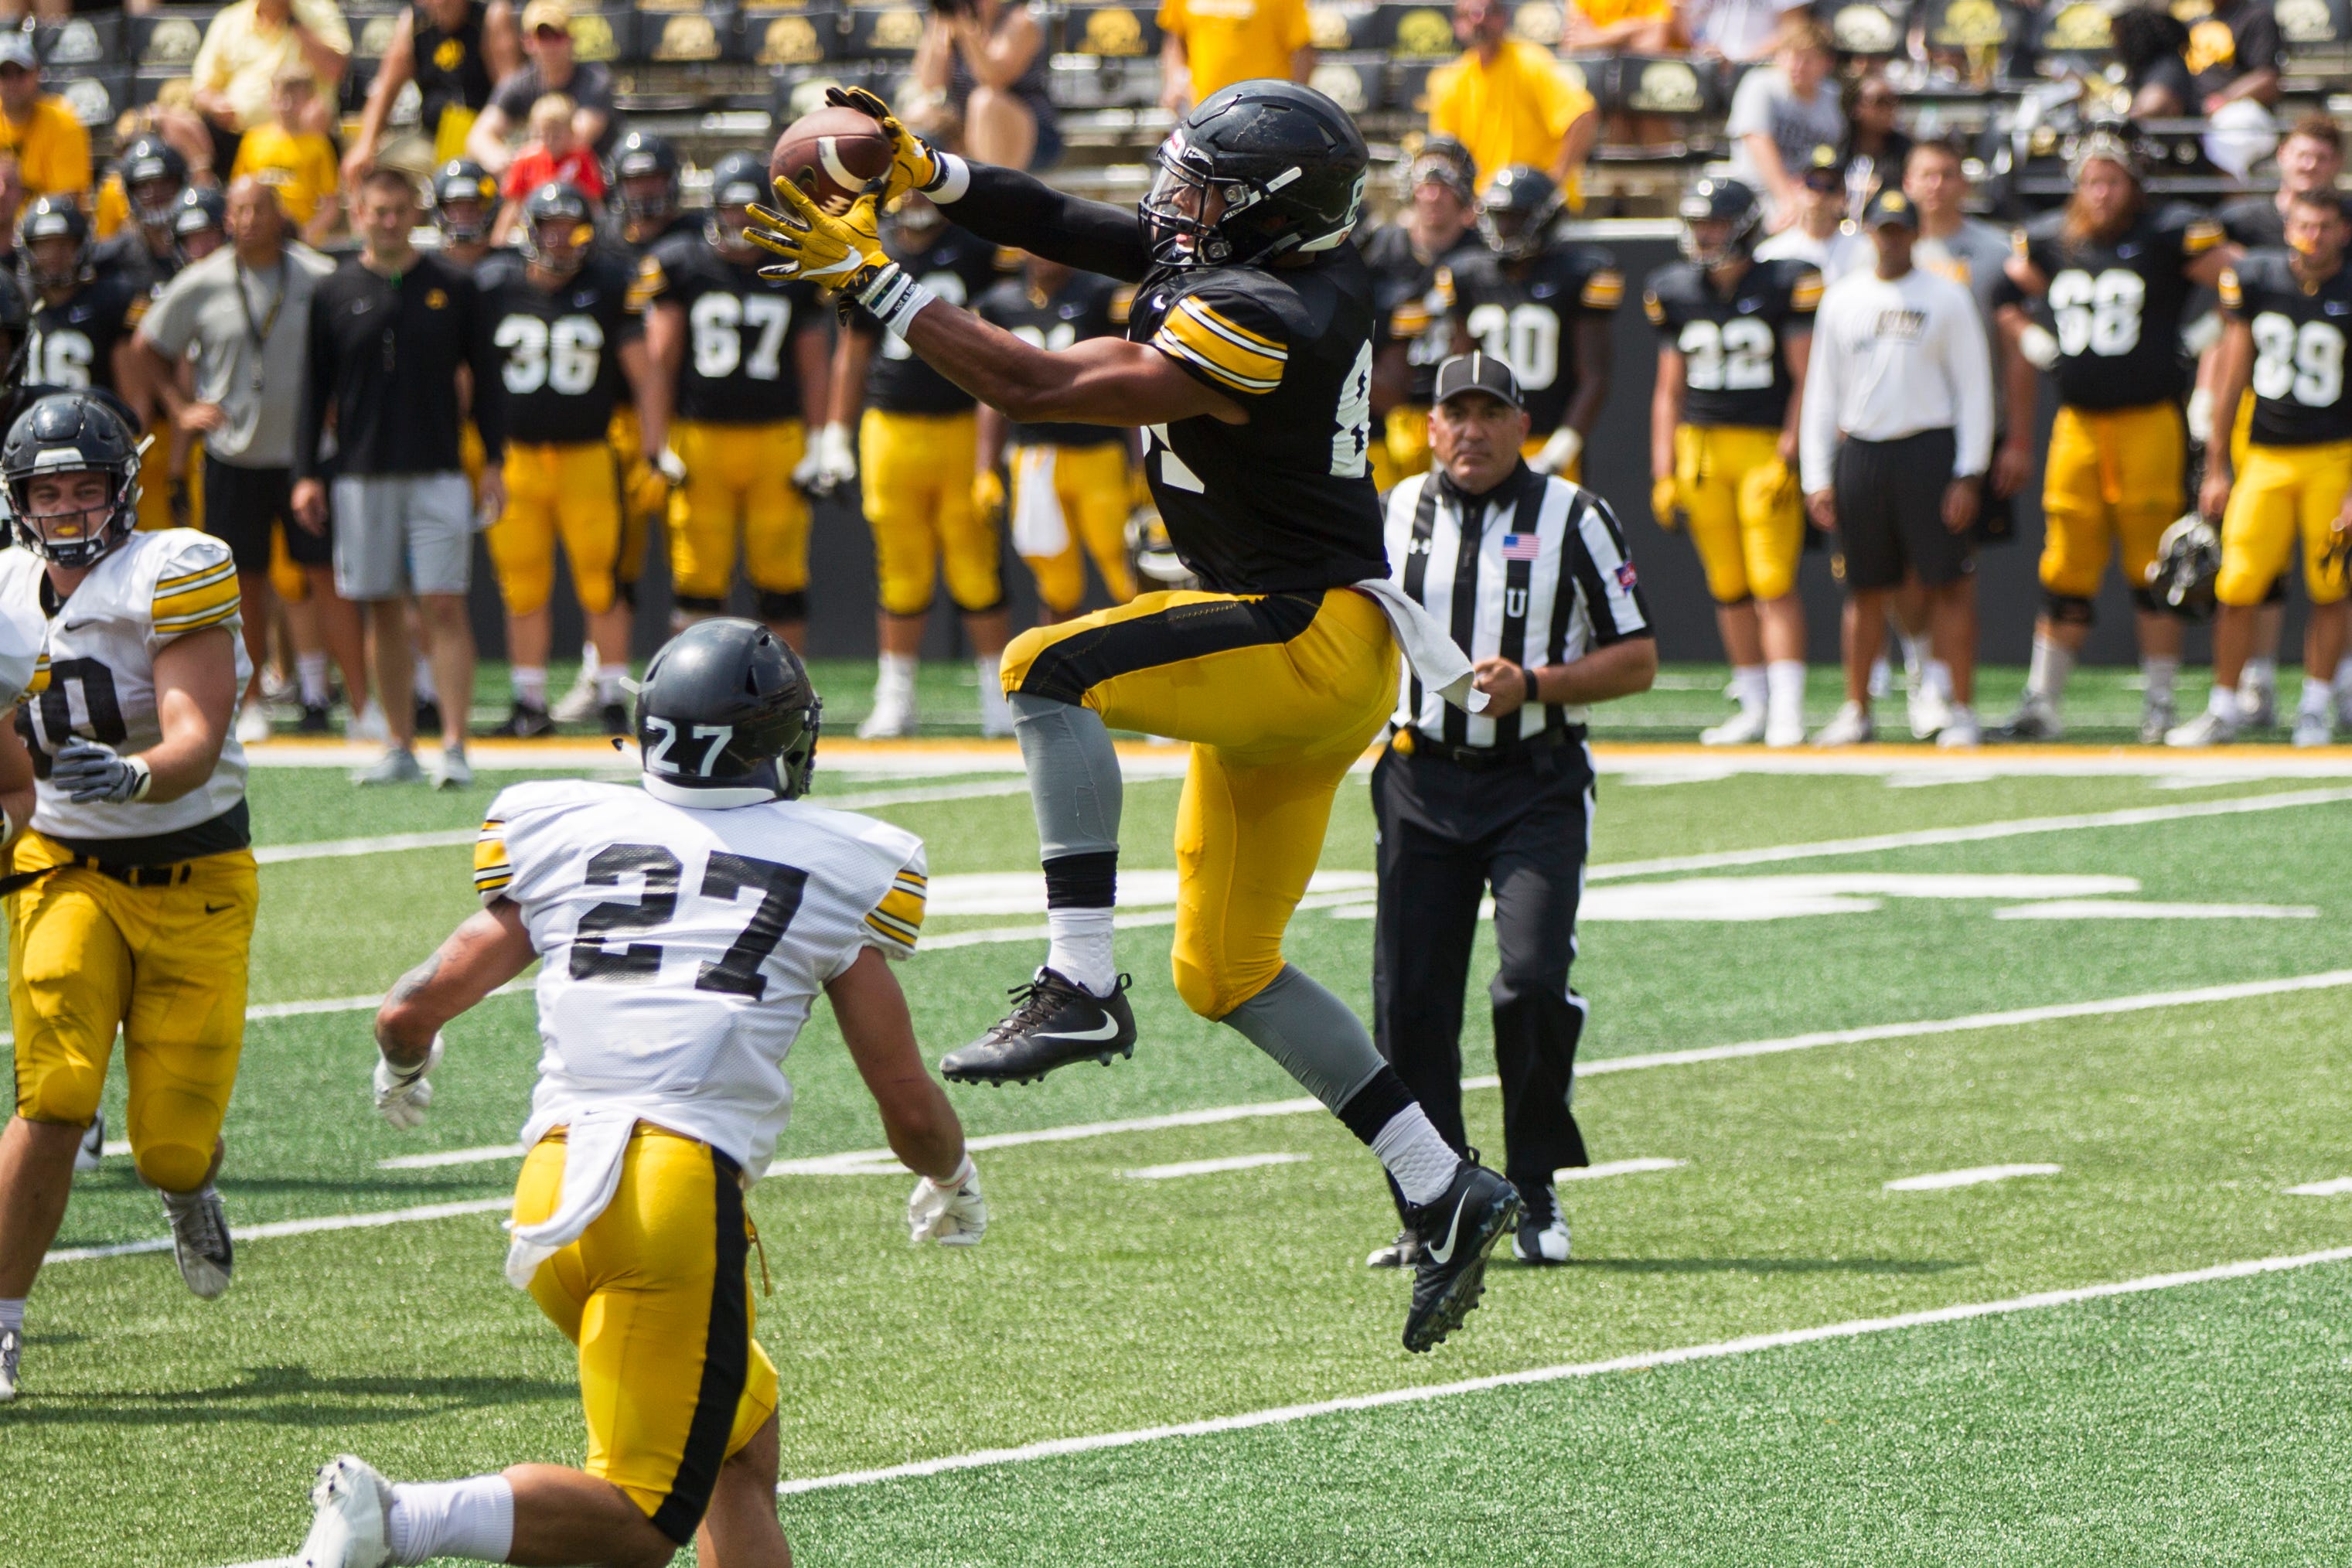 Iowa tight end Noah Fant (87) catches a pass during a Kids Day practice on Saturday, Aug. 11, 2018, at Kinnick Stadium in Iowa City.